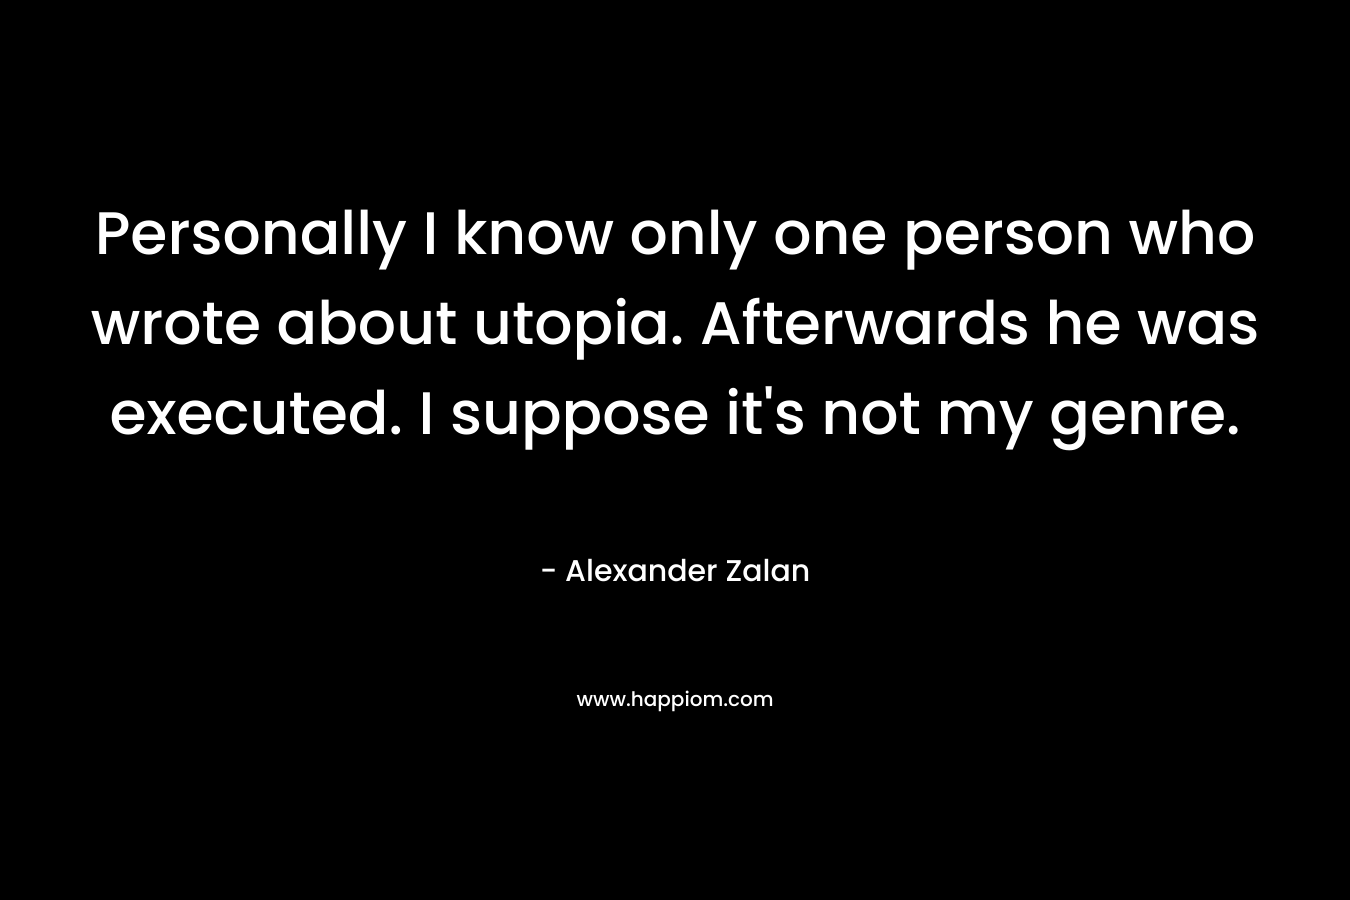 Personally I know only one person who wrote about utopia. Afterwards he was executed. I suppose it's not my genre.